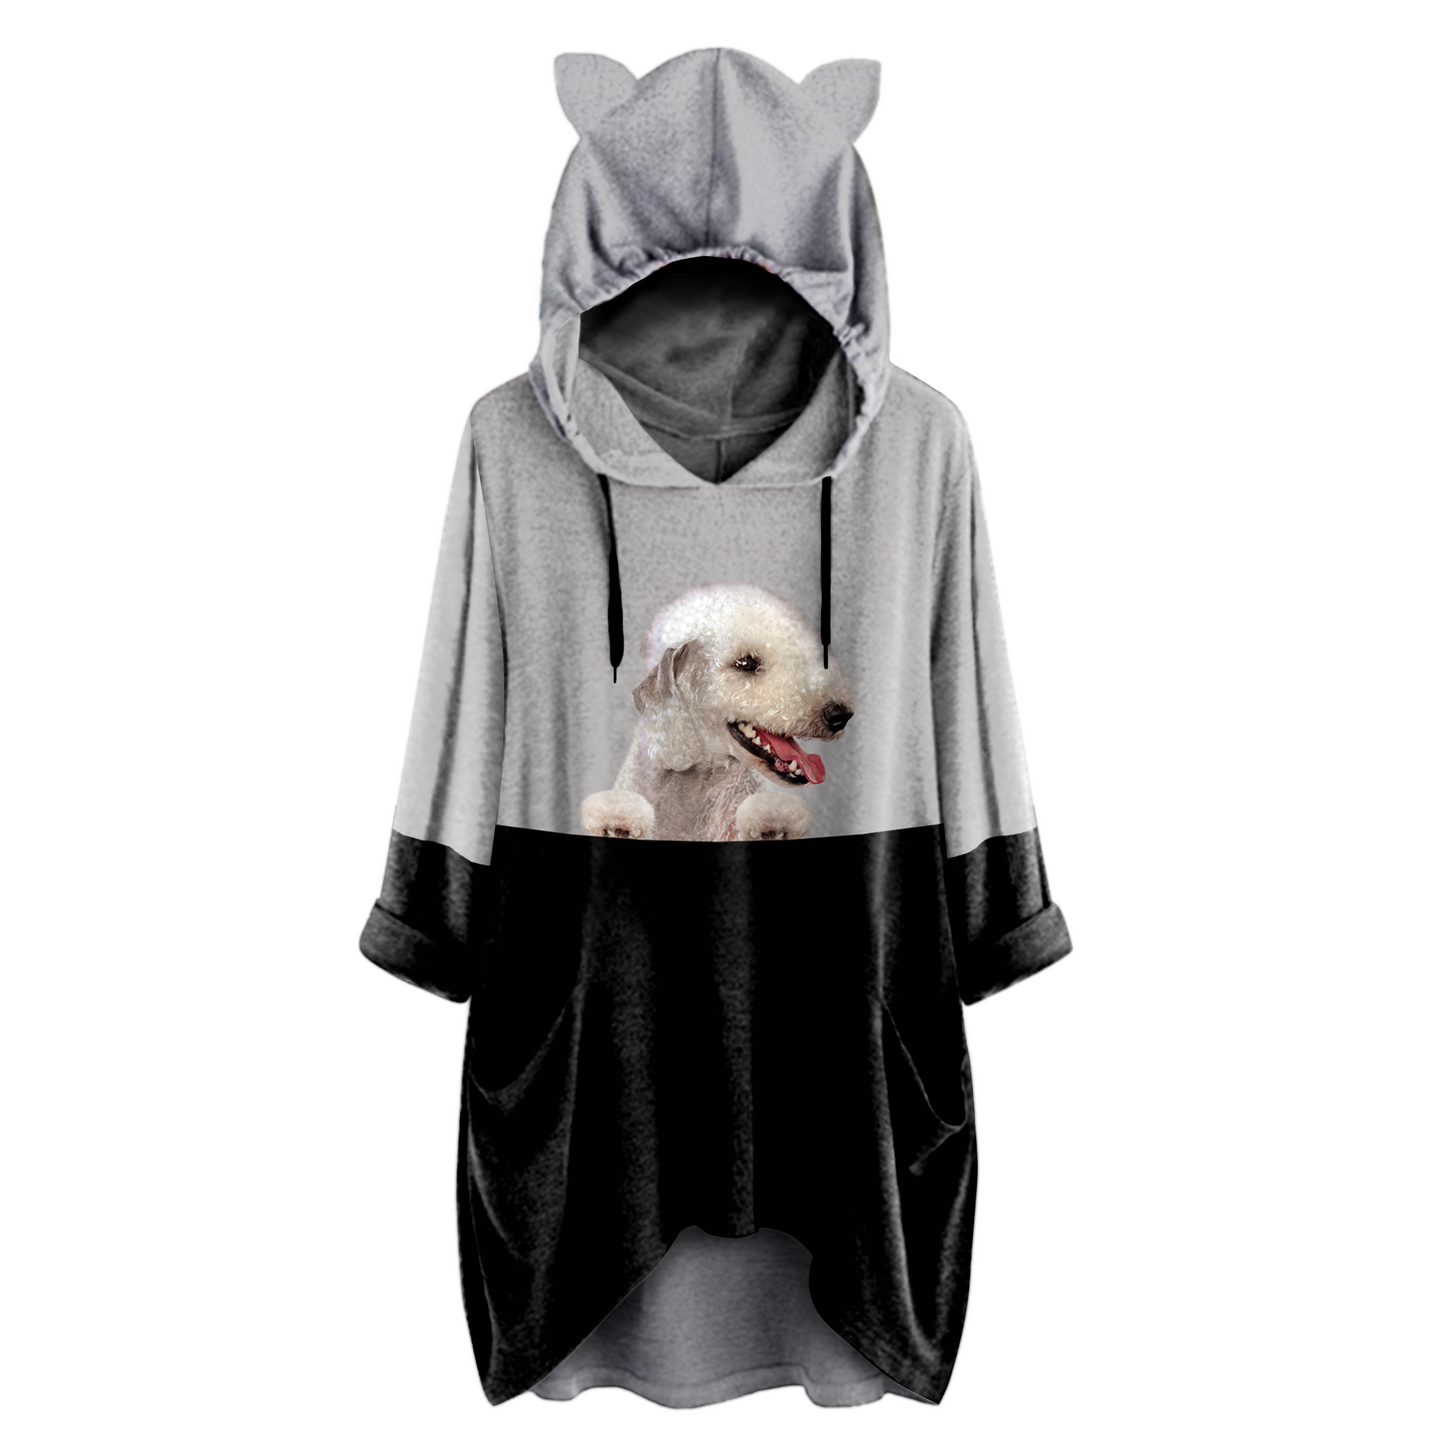 Can You See Me Now - Bedlington Terrier Hoodie With Ears V1